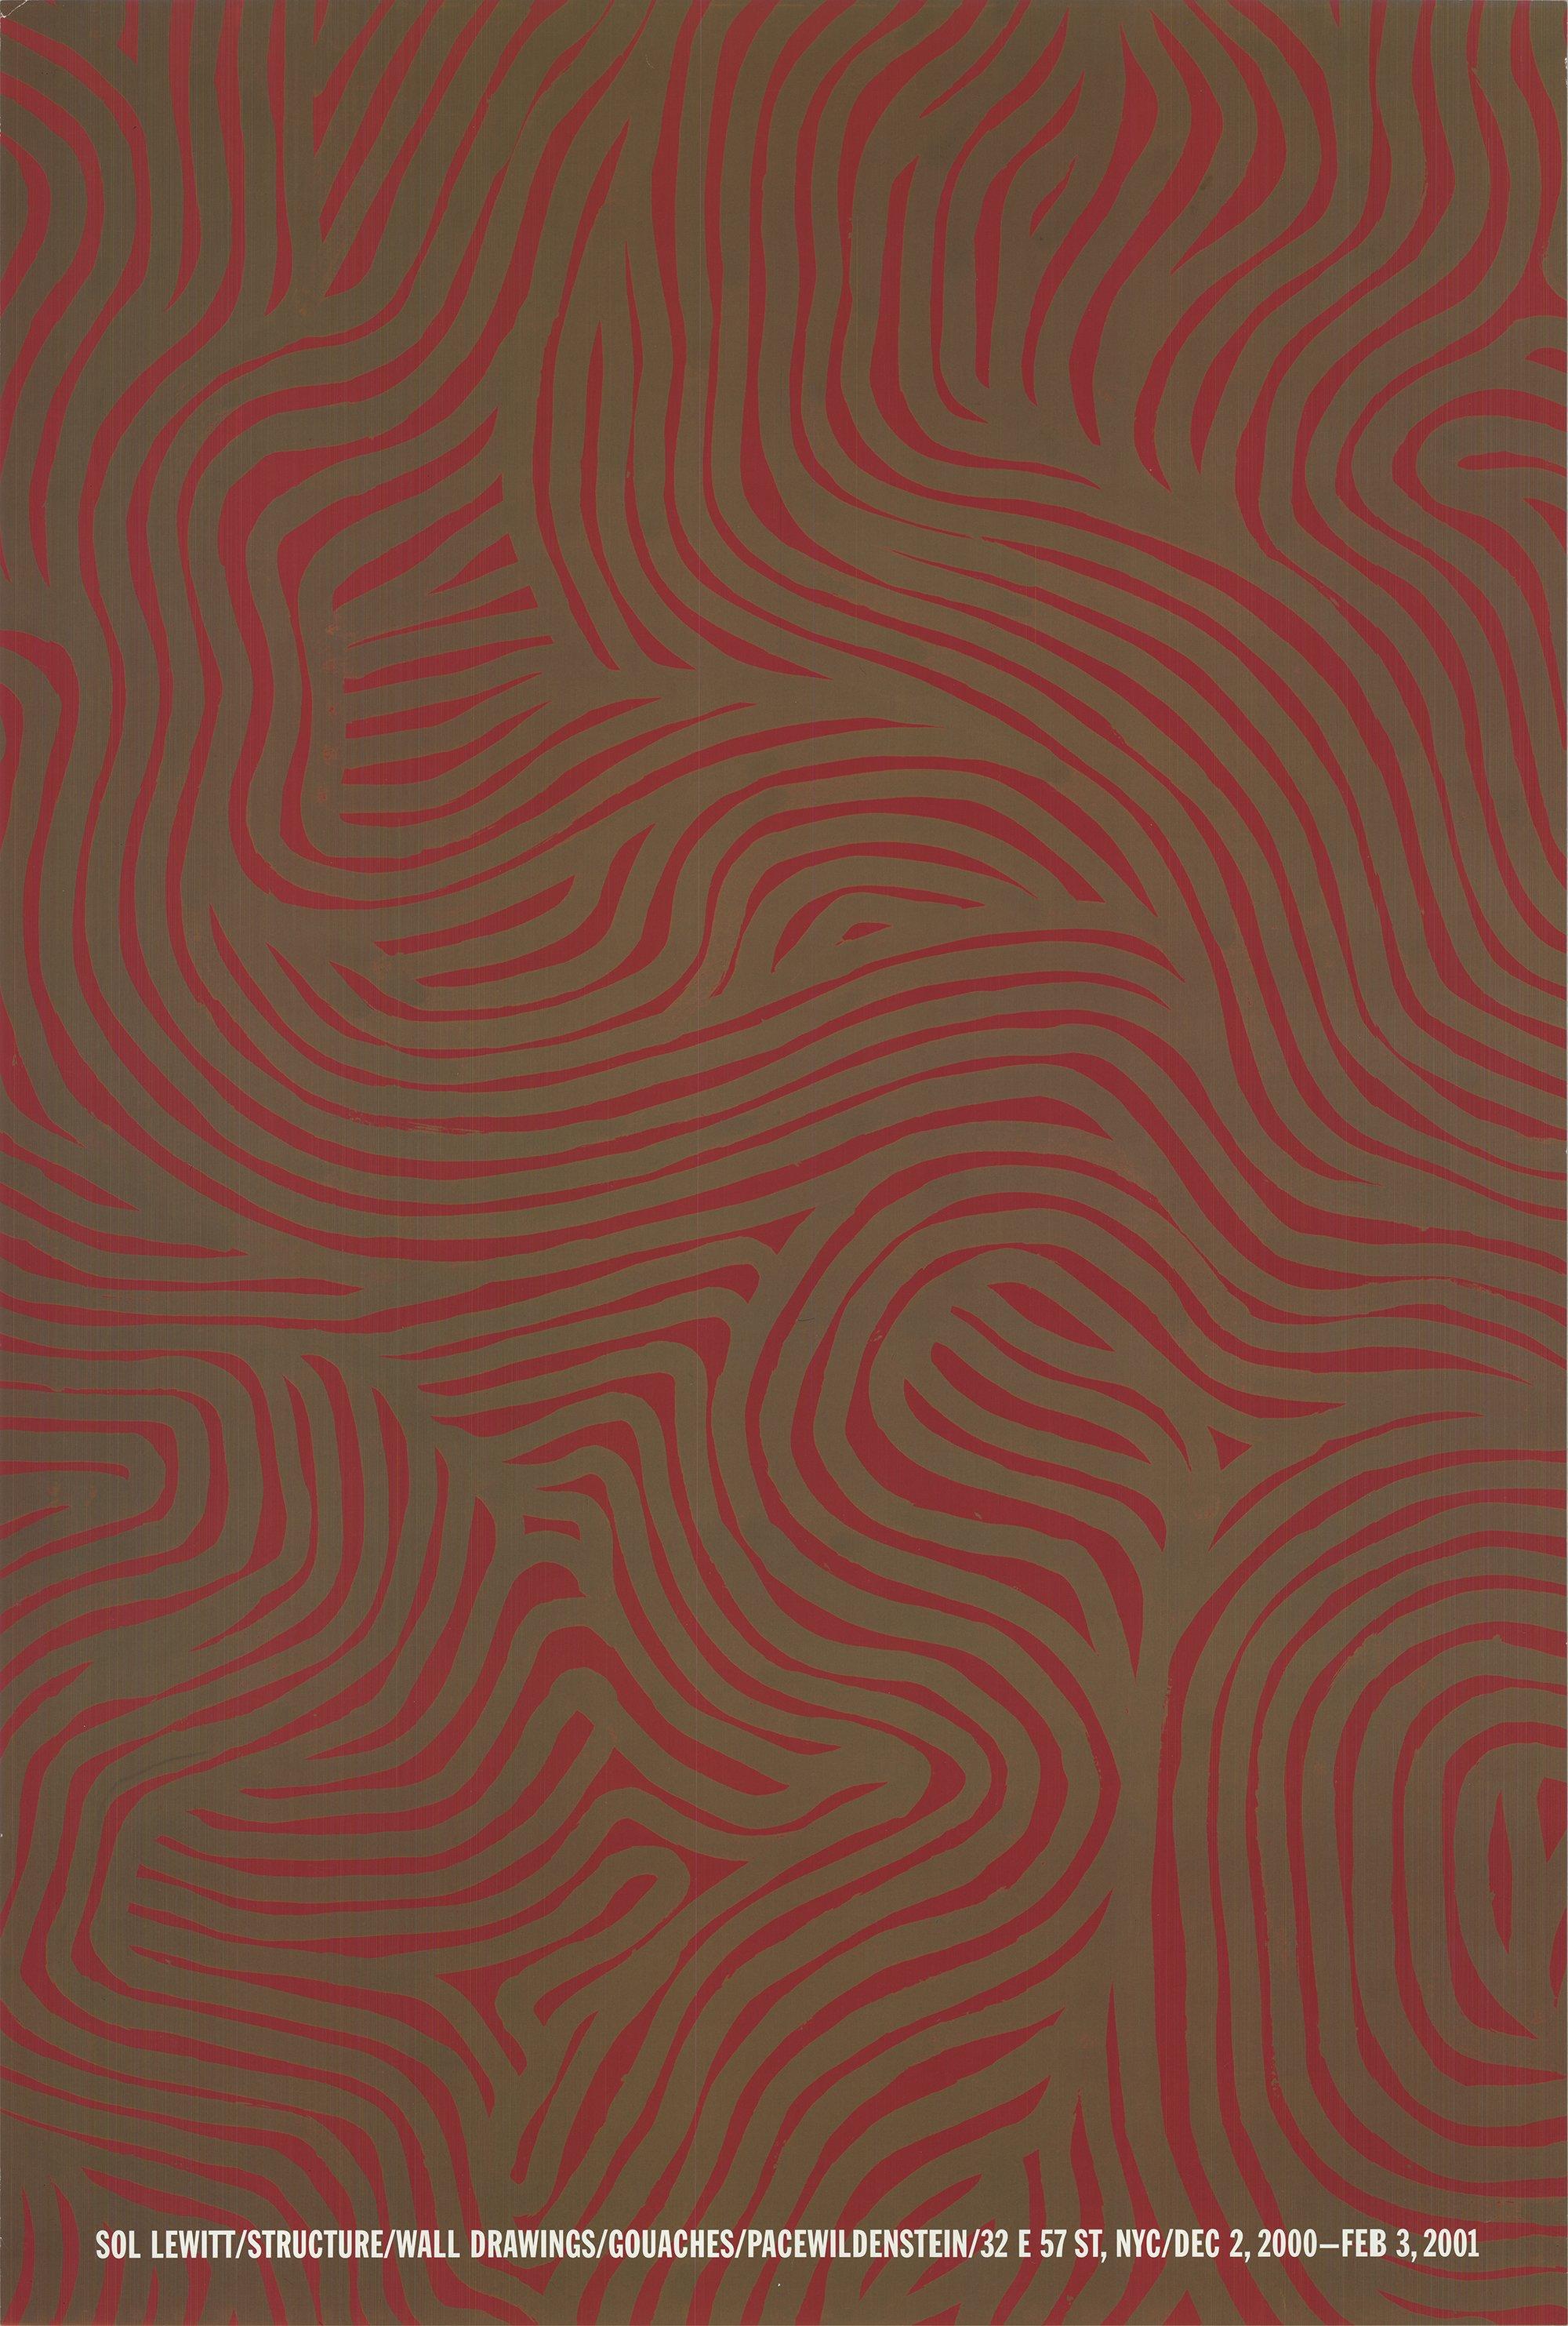 2000 After Sol Lewitt 'Structure/Wall'  - Print by Sol LeWitt